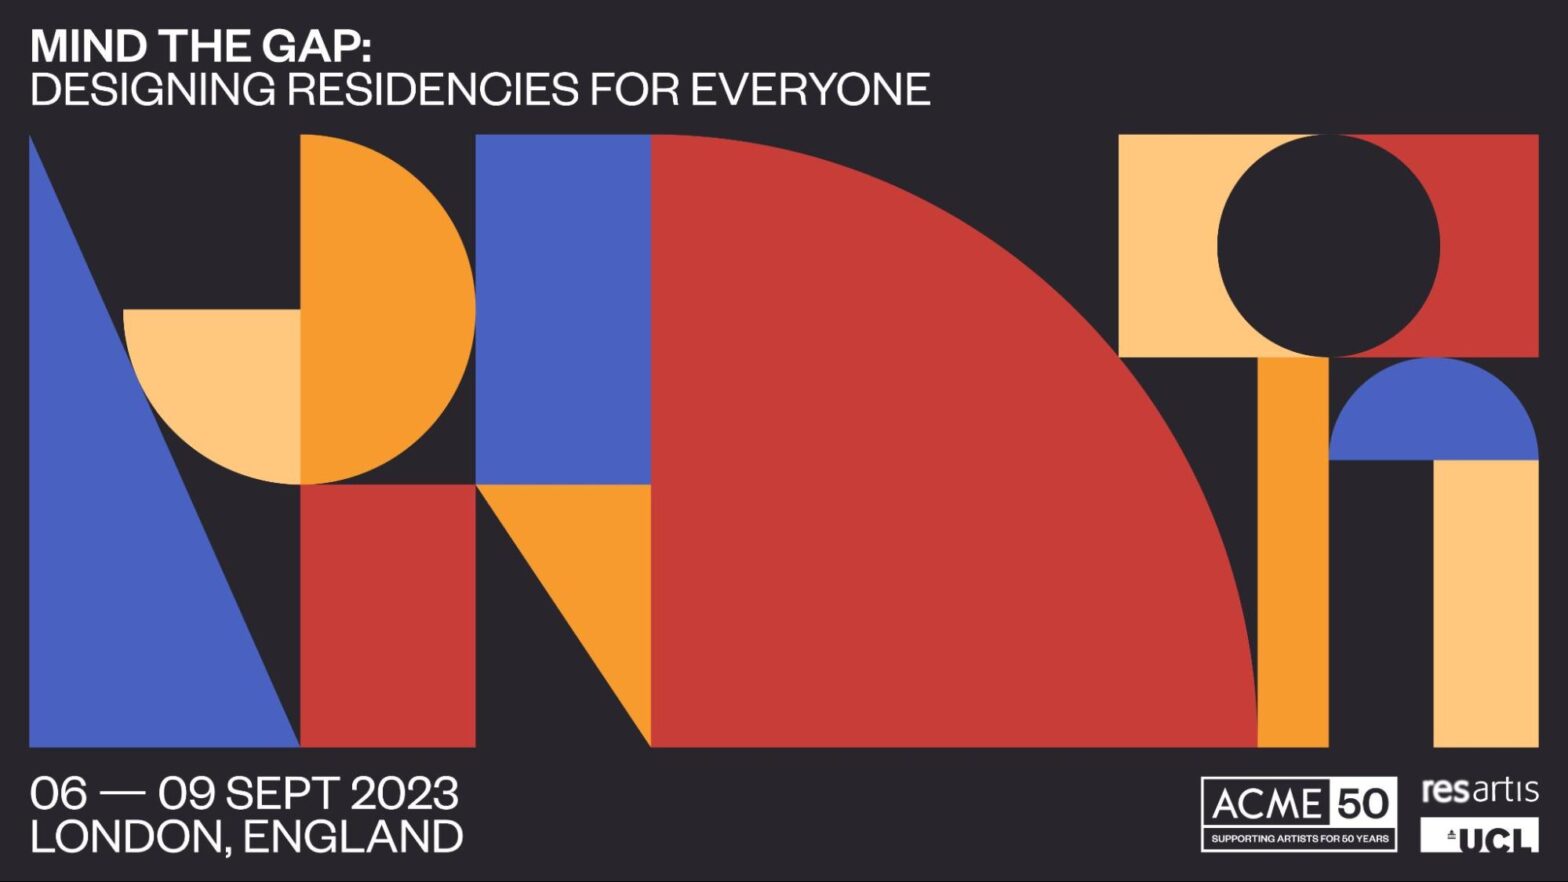 Mind The Gap: Designing Resdencies for Everyone, 0609 Sept 2023, London, England